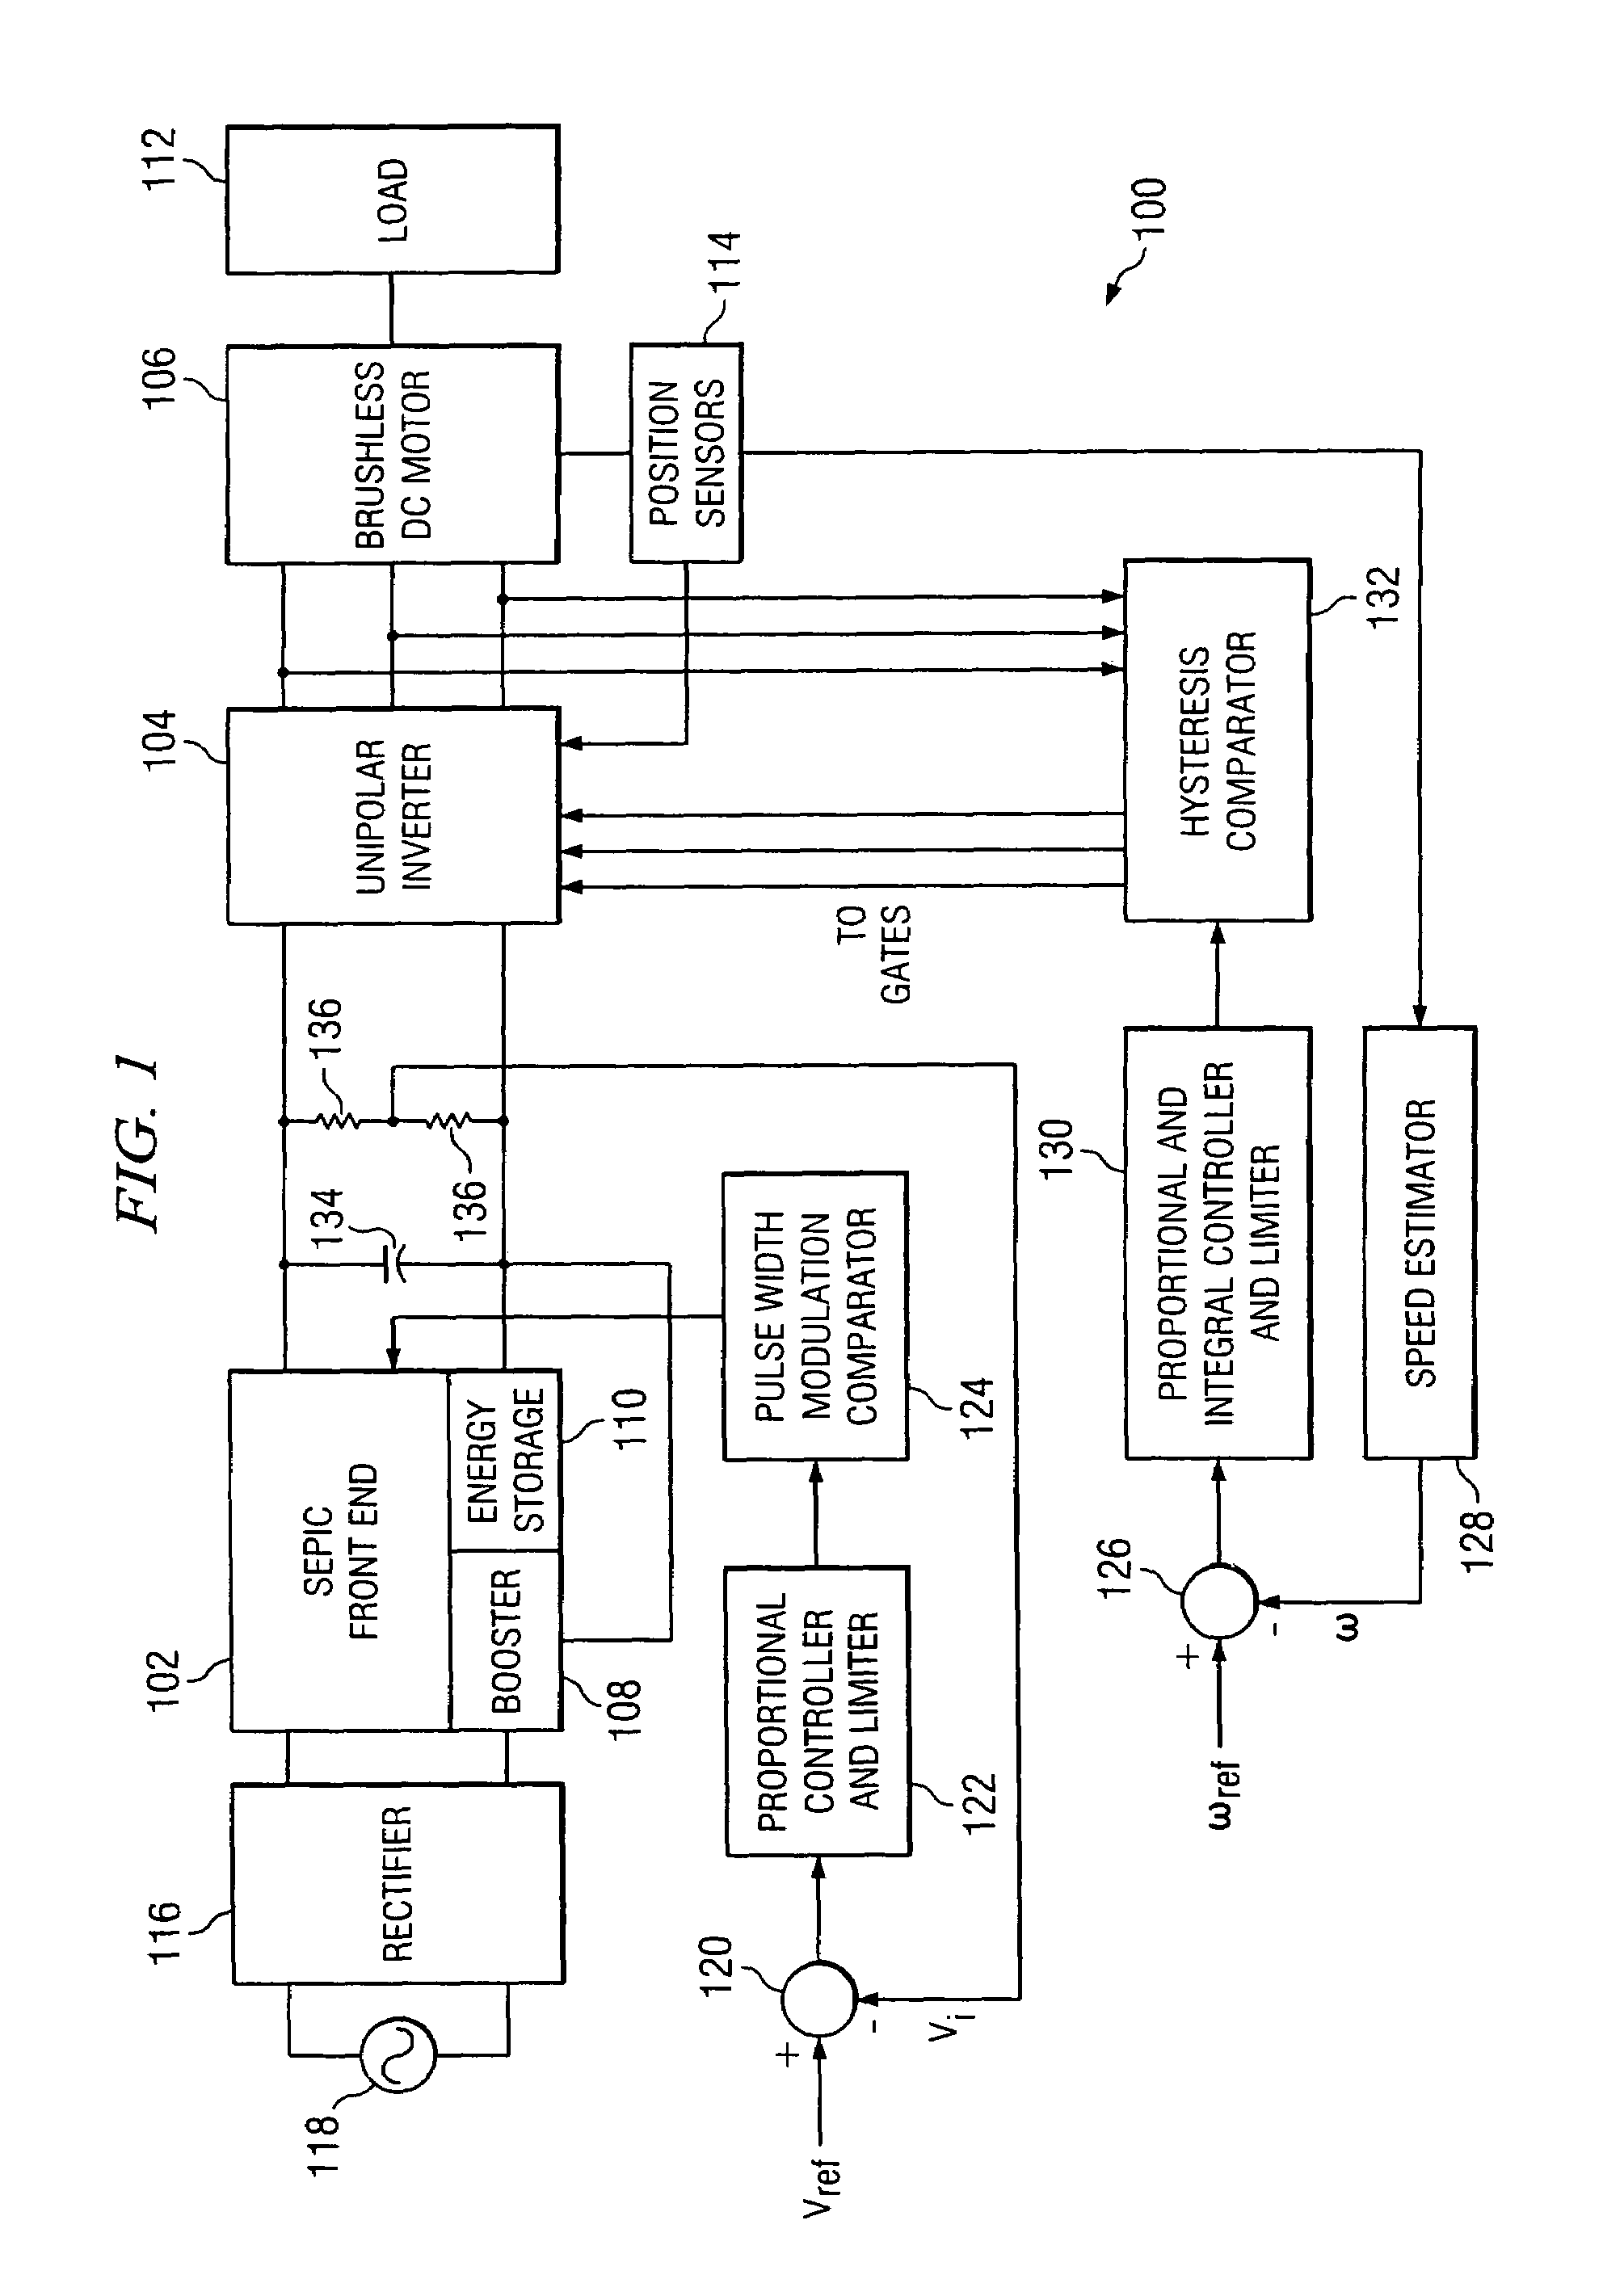 Unipolar drive topology for permanent magnet brushless DC motors and switched reluctance motors